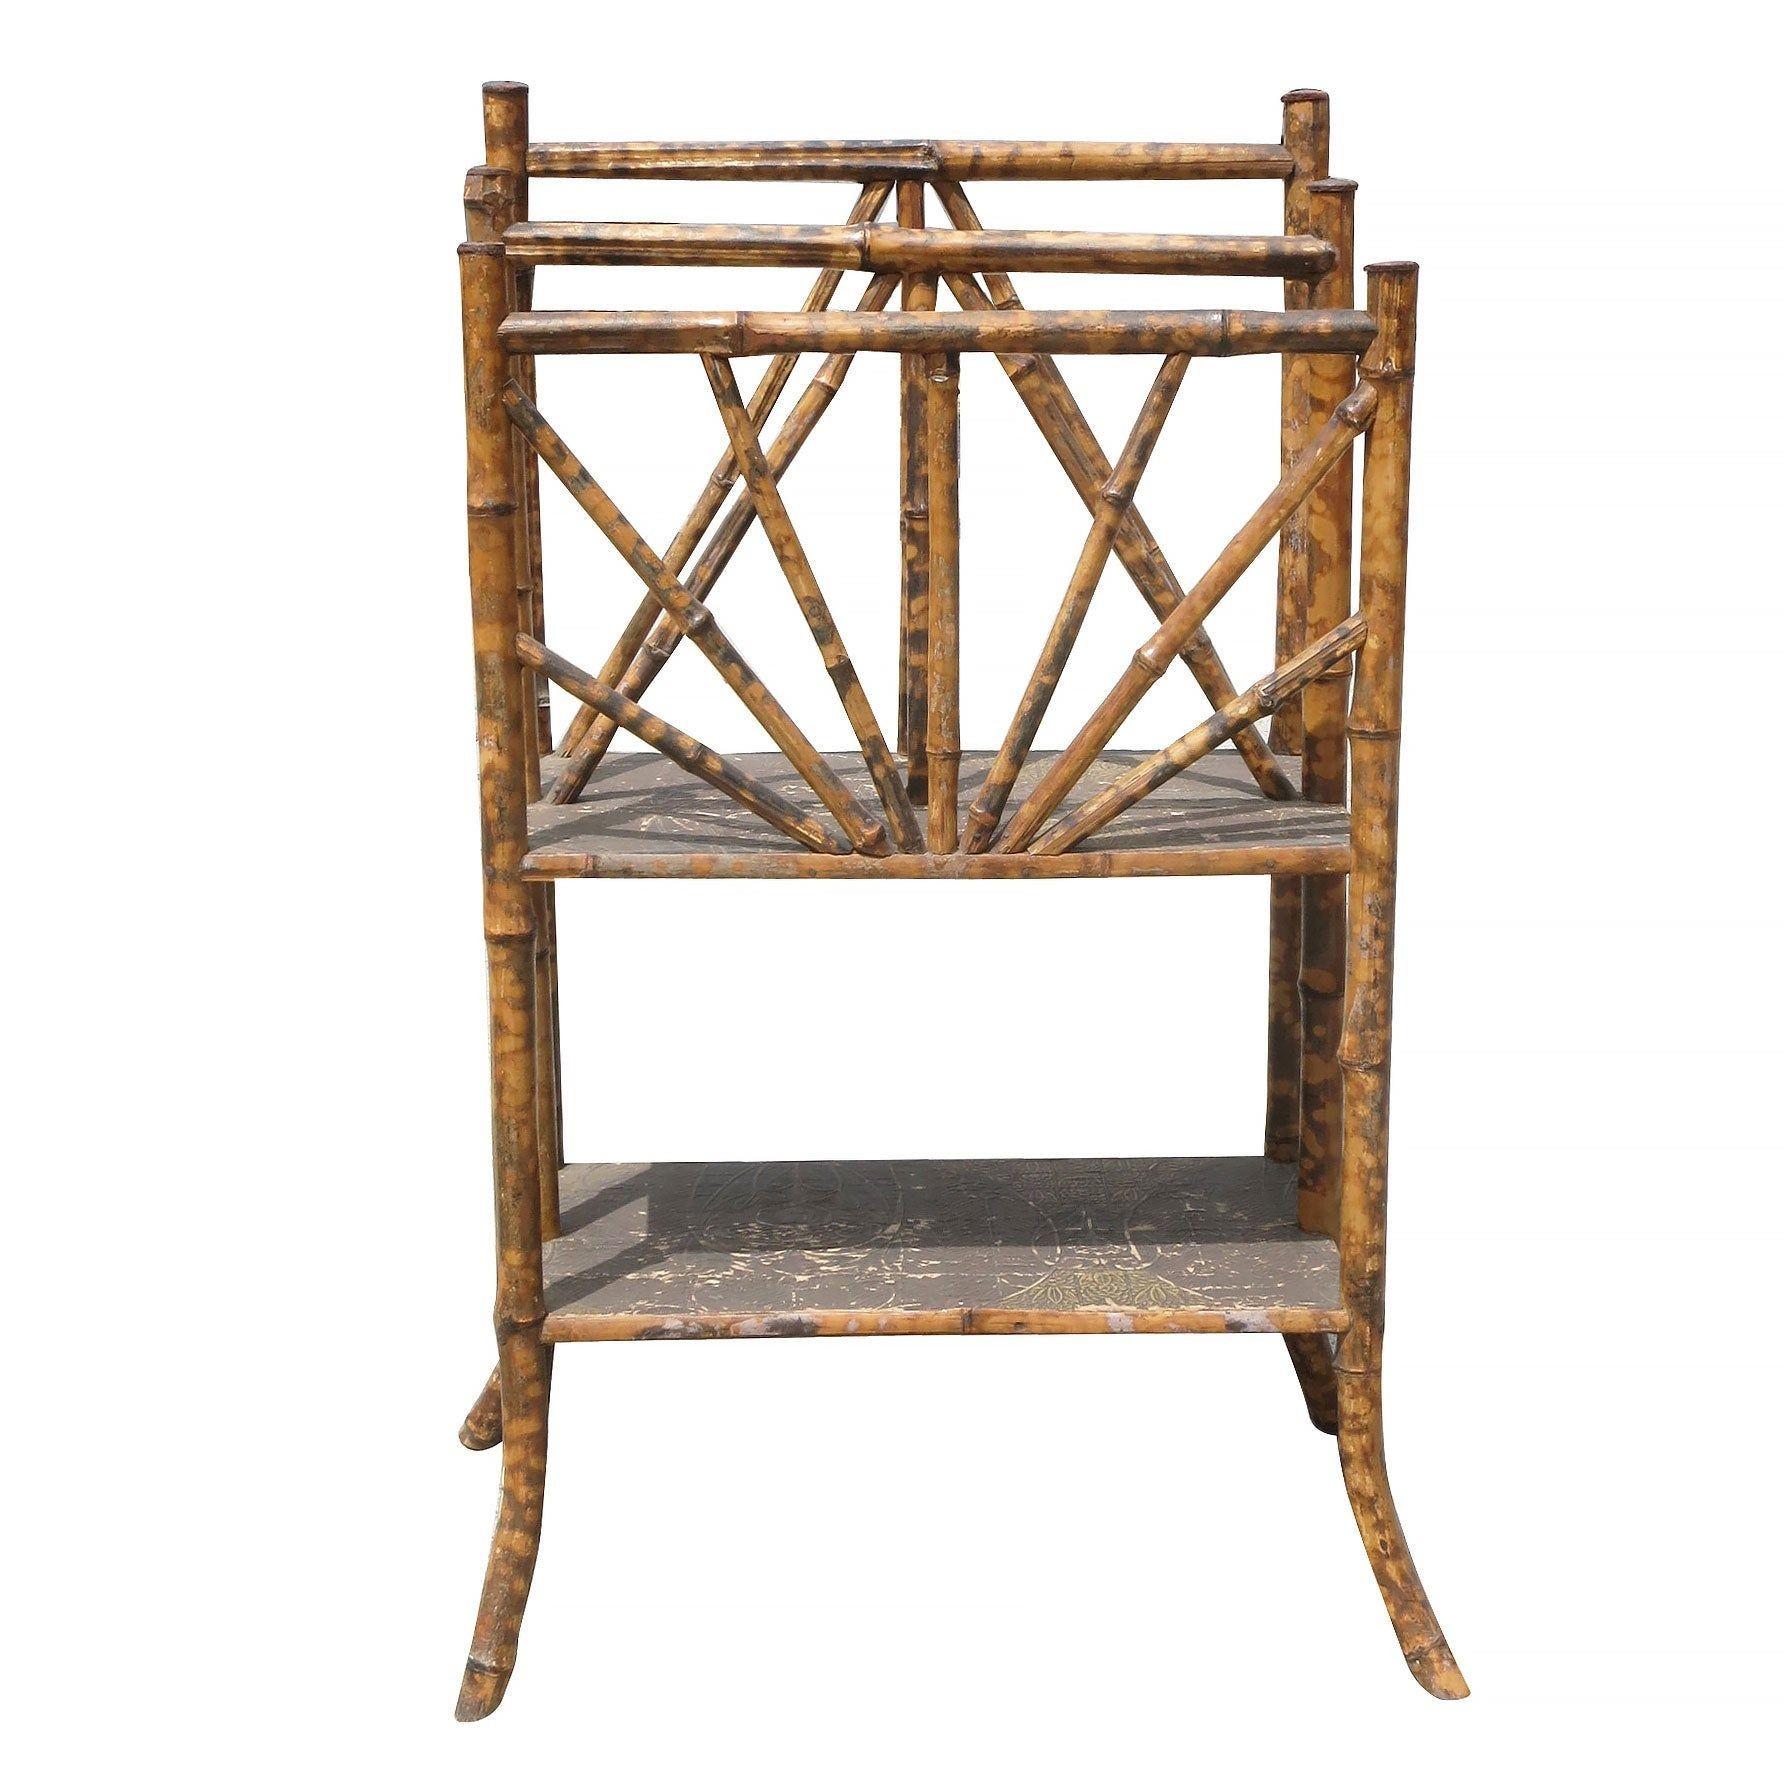 Antique Aesthetic Movement tiger bamboo magazine rack with divider and bottom shelf. The rack features a unique Art Nouveau relief along the top of each tier on the self.

1900, United States

We only purchase and sell only the best and finest